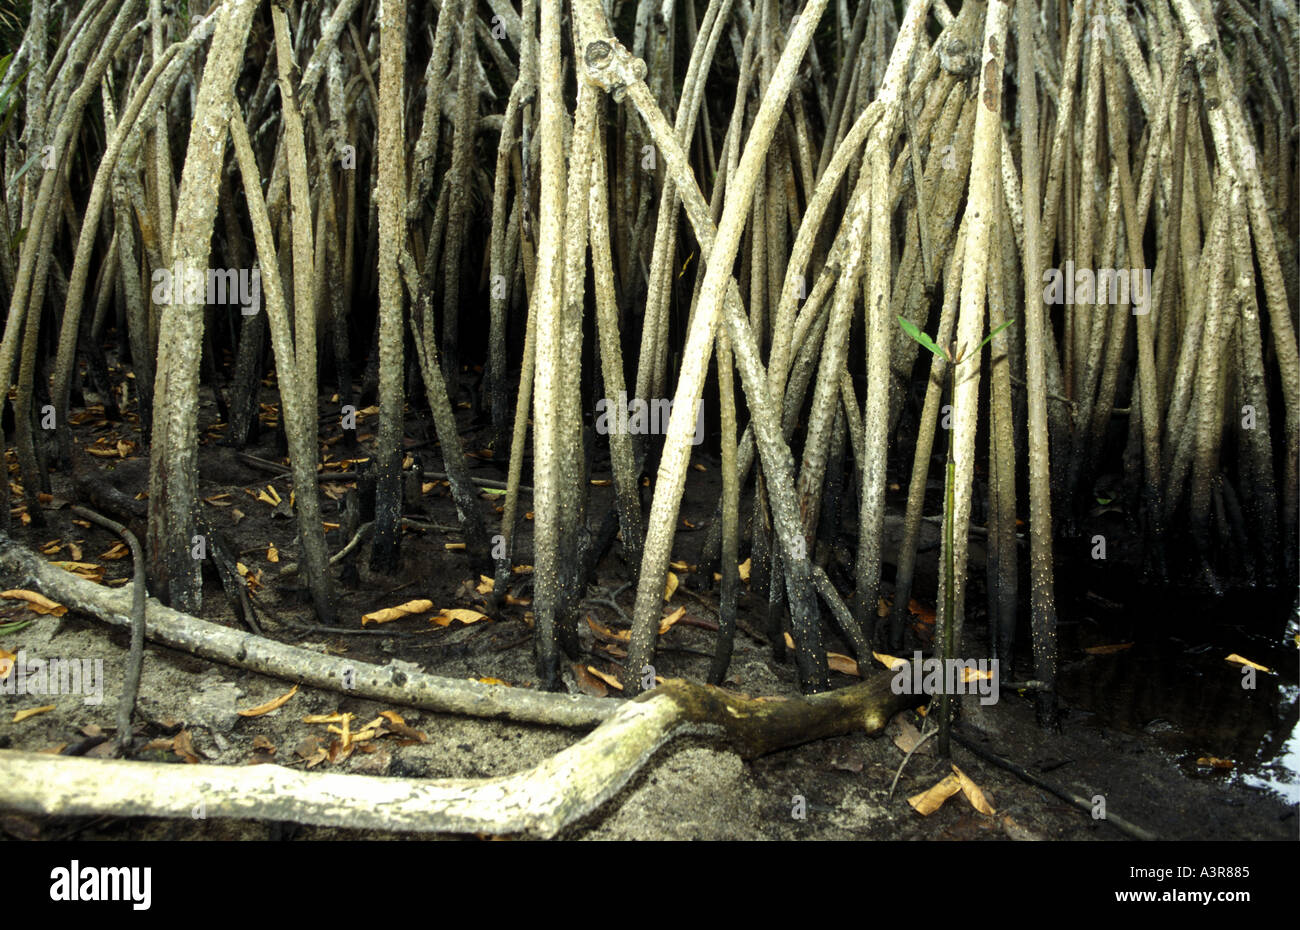 Mangrove trees showing the splayed roots Pongara National Park on the Atlantic coast of Gabon West Africa Stock Photo